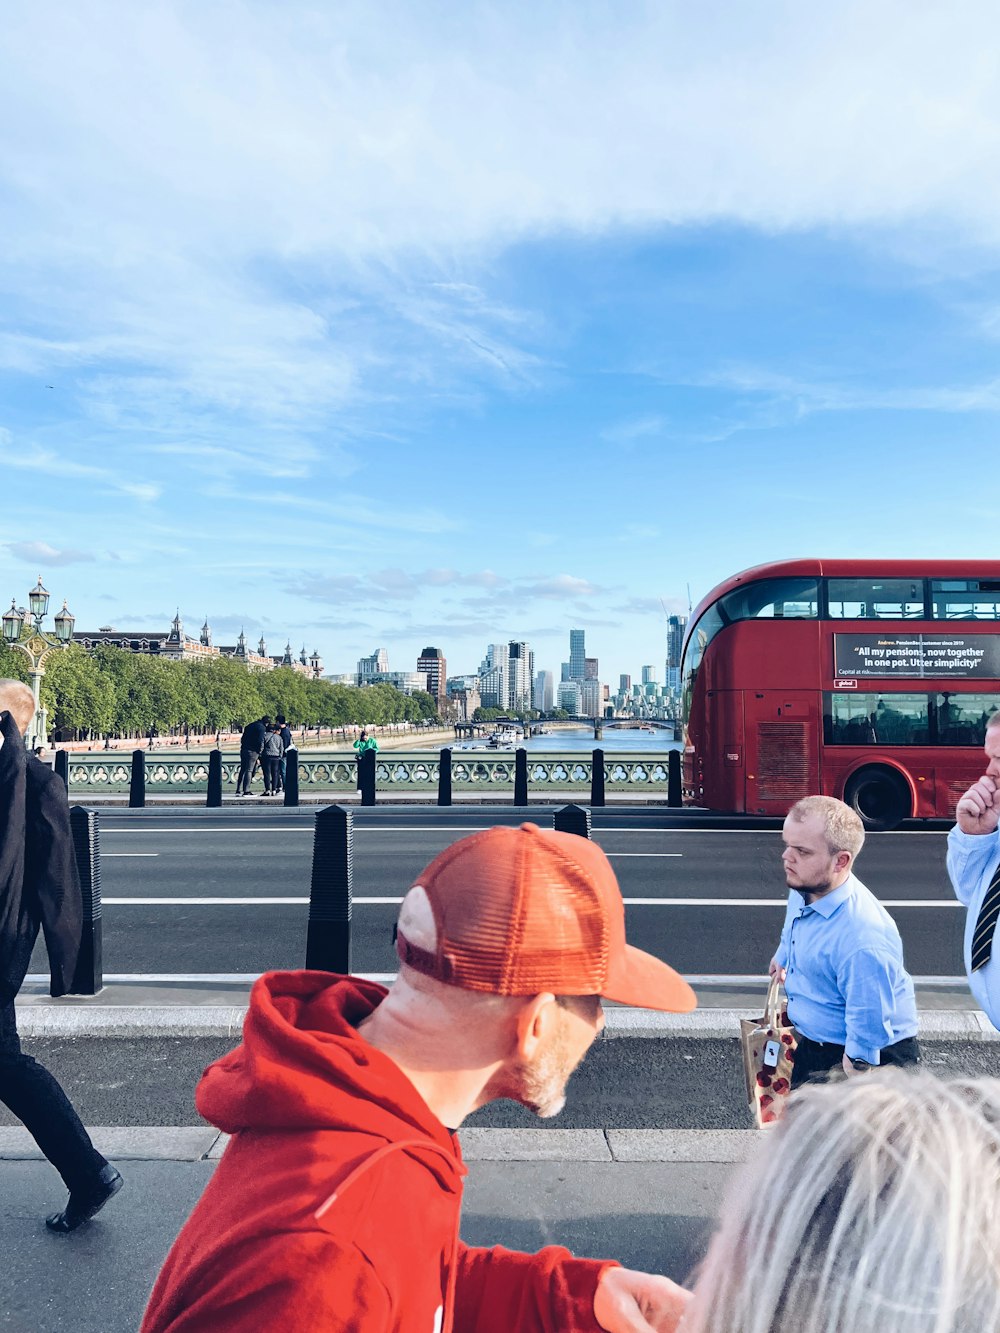 a group of people walking down a street next to a red double decker bus